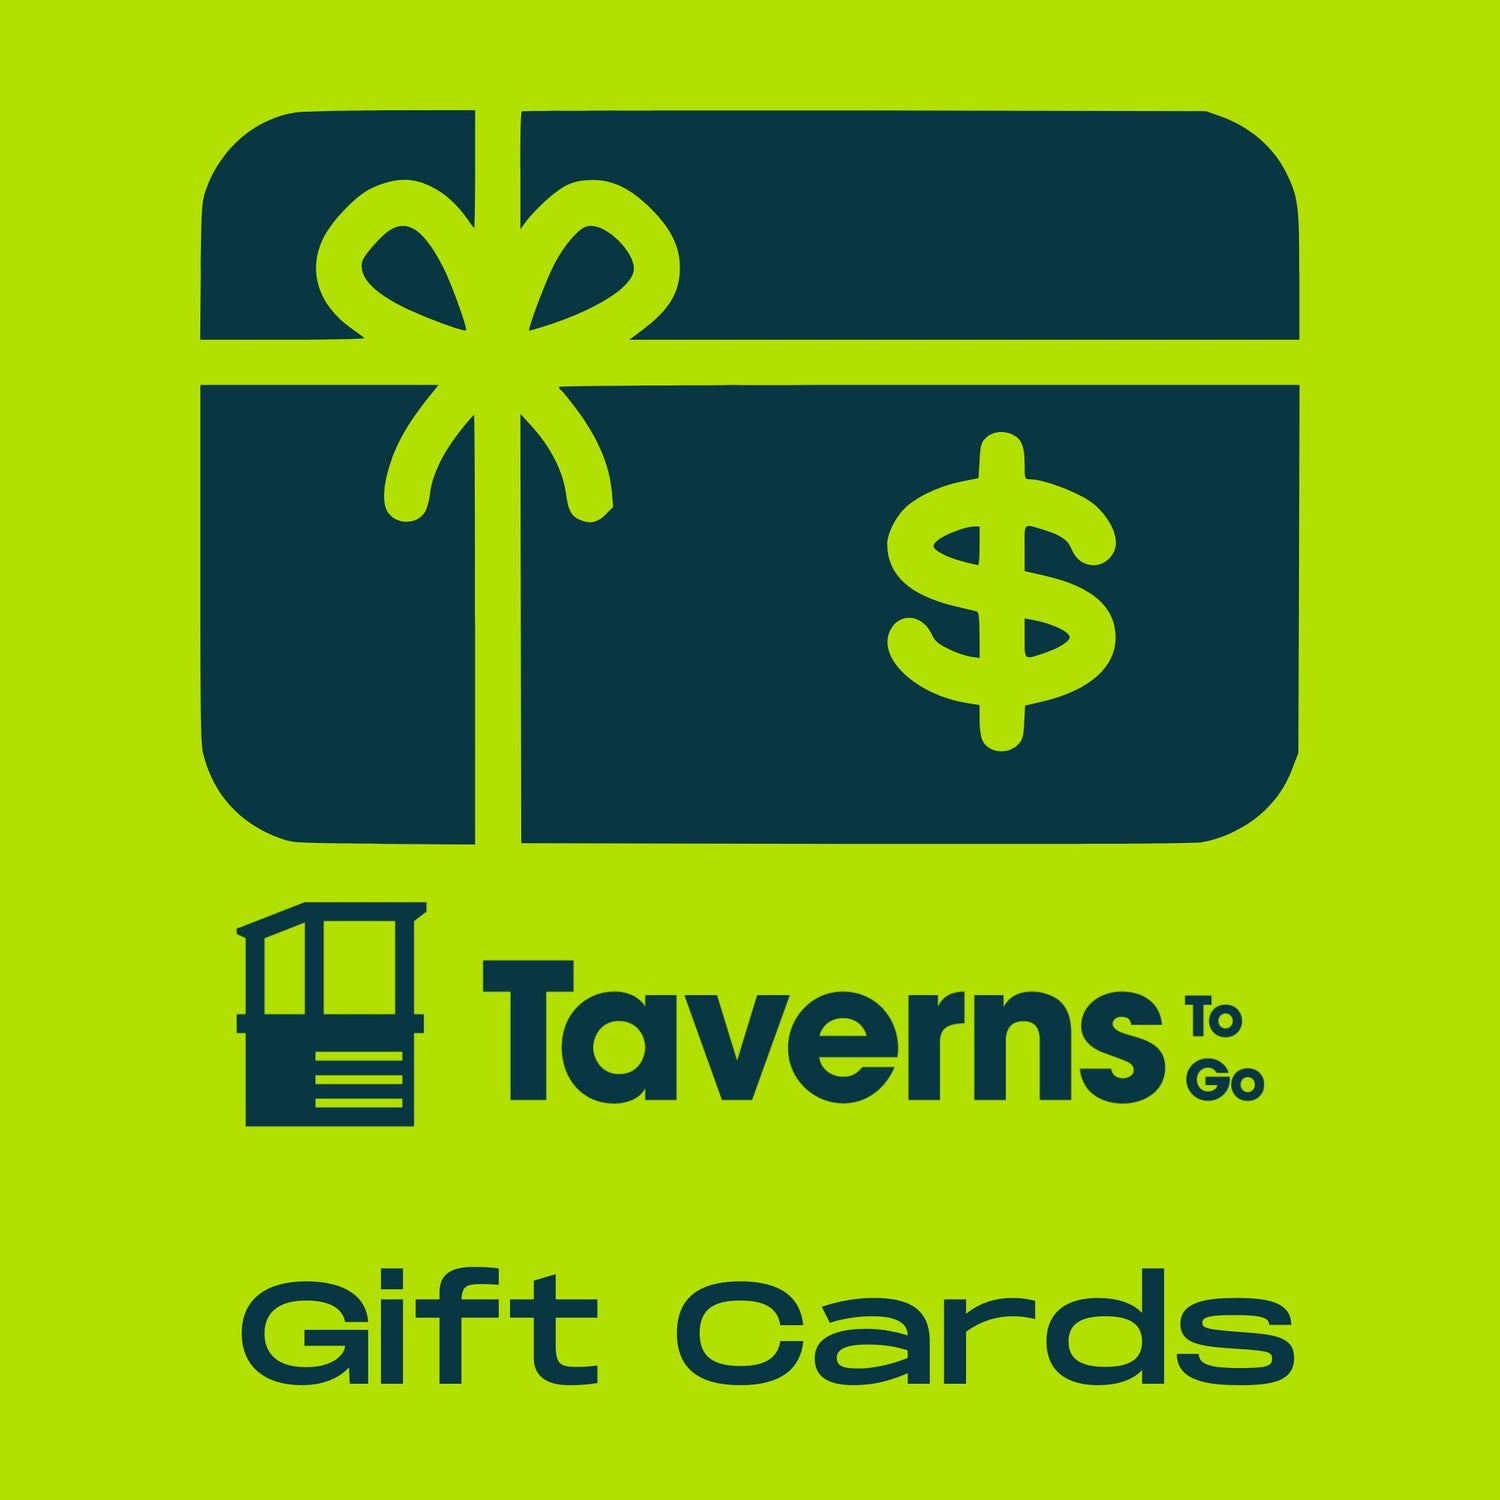 GIFT Cards